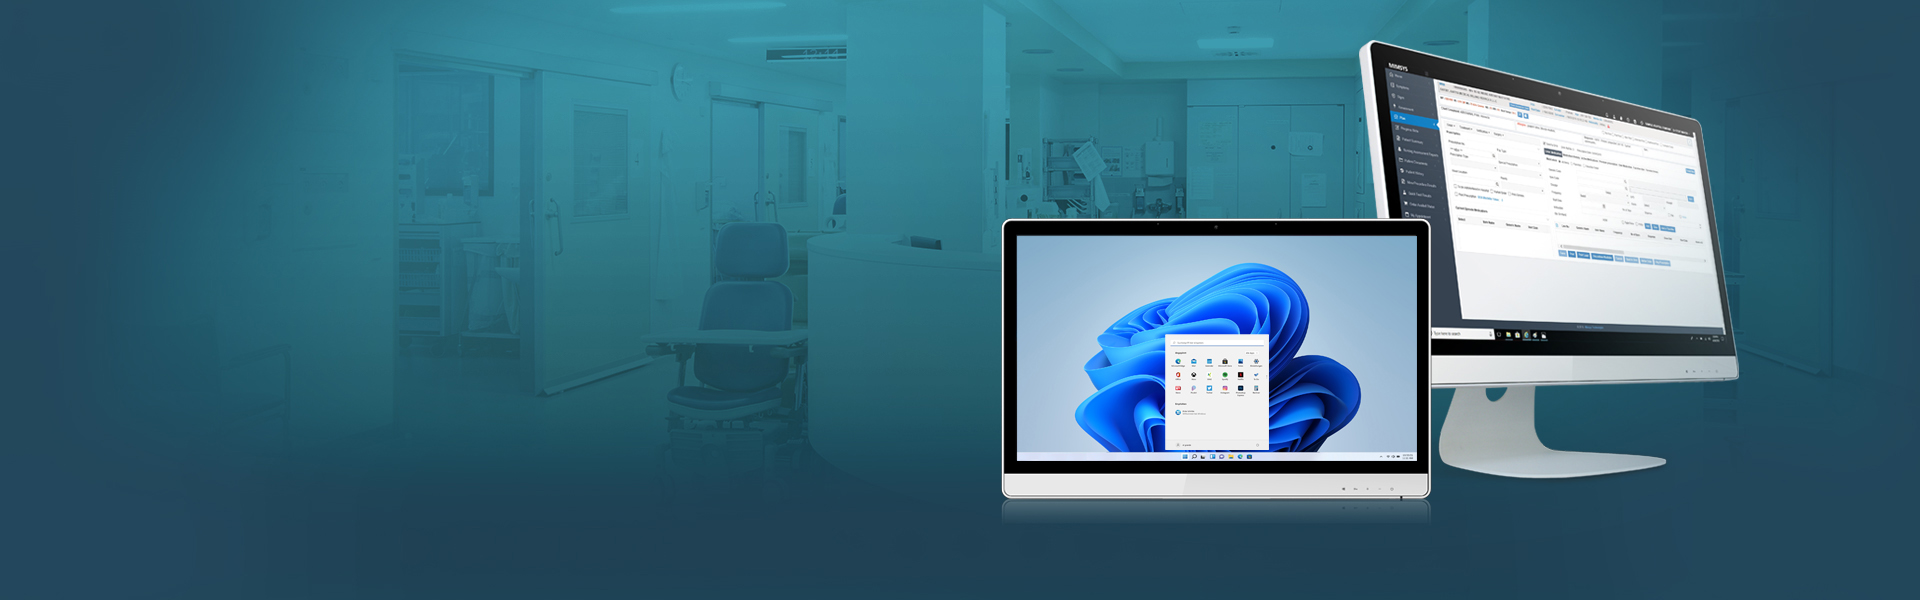 504T Medical All-in-one Computers